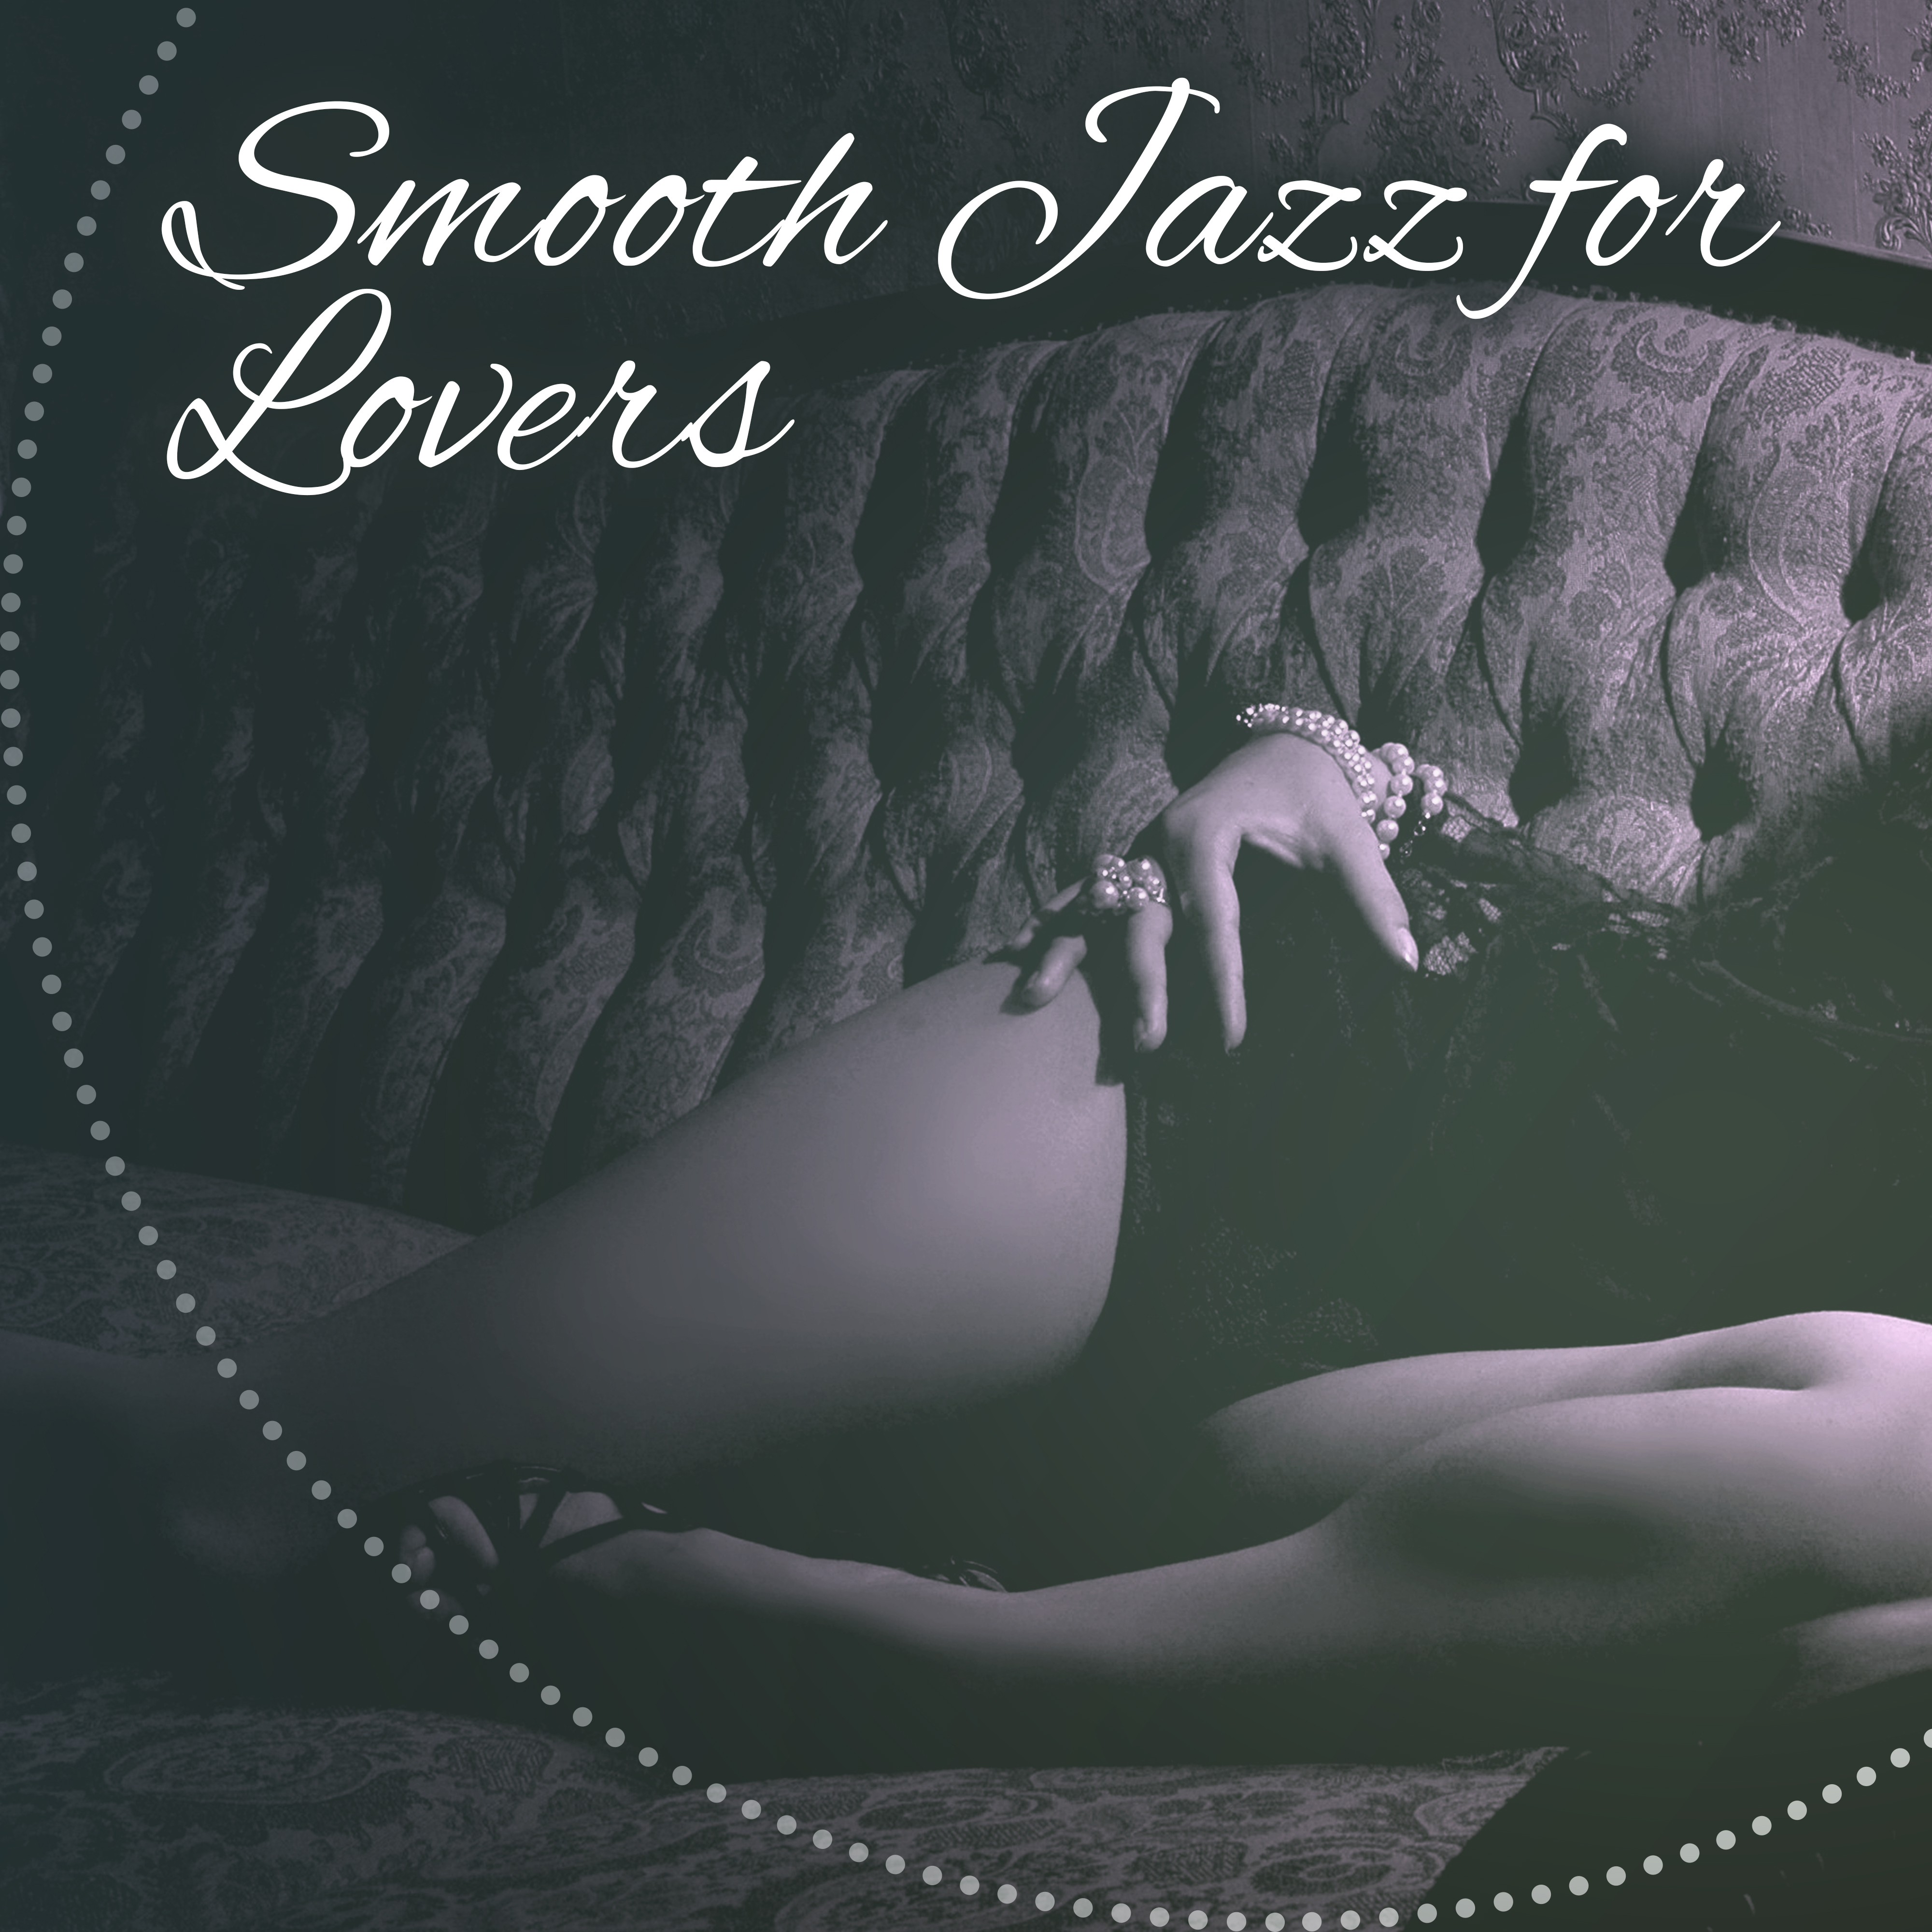 Smooth Jazz for Lovers  Calm Down with Soft Sounds, Music to Relax, Stress Relief,  Note